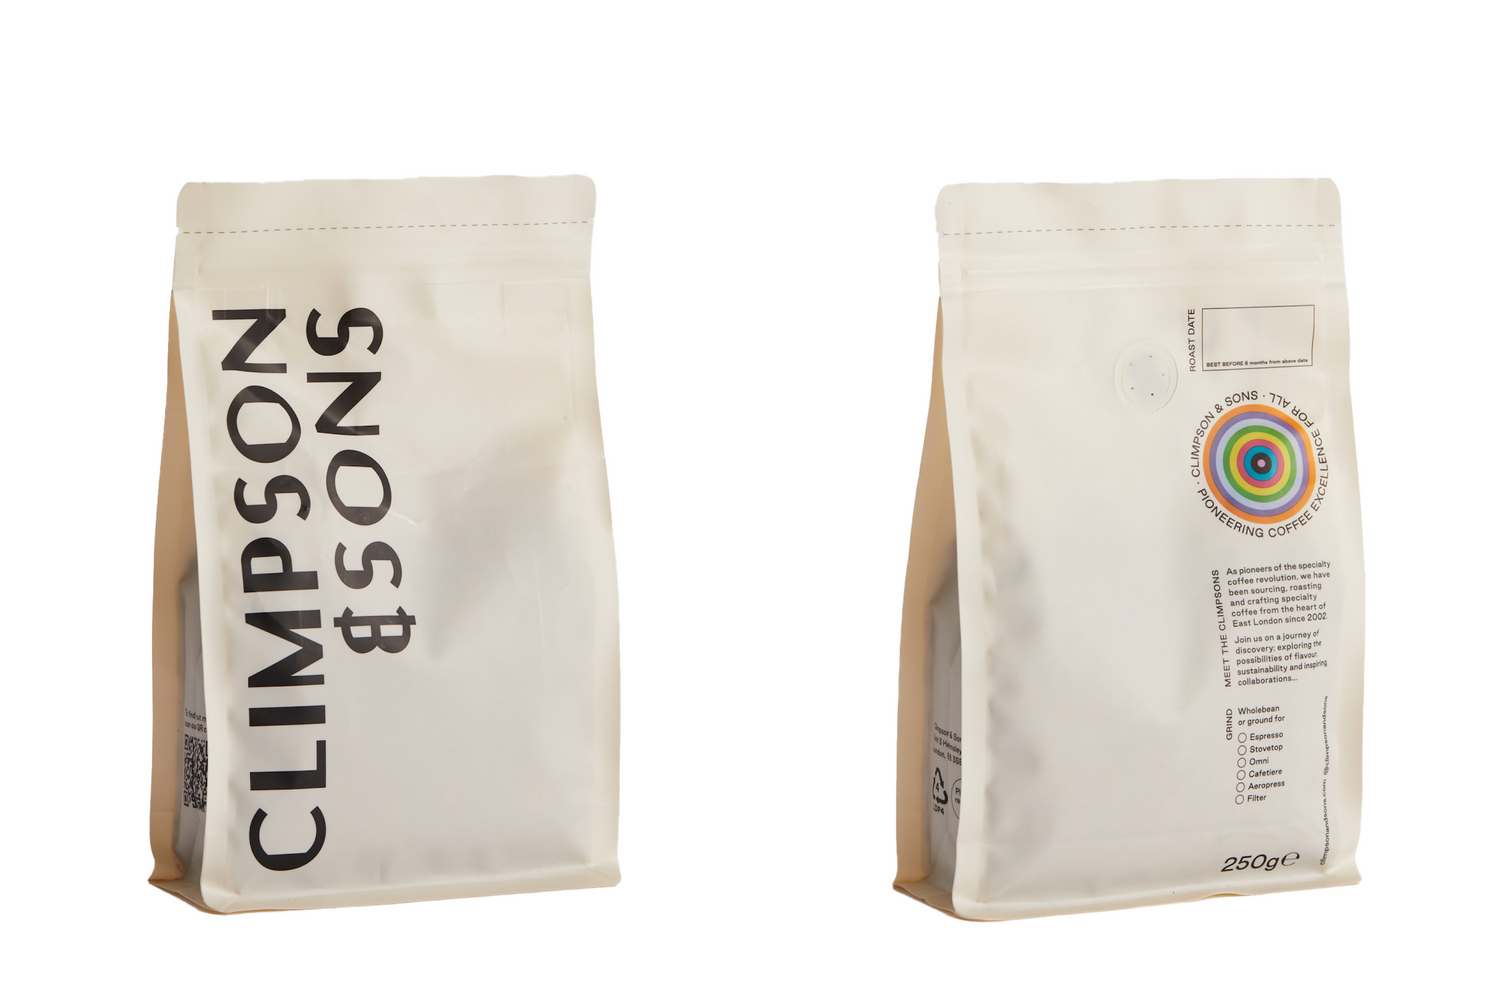 Interesting Facts About Our New Coffee Packaging